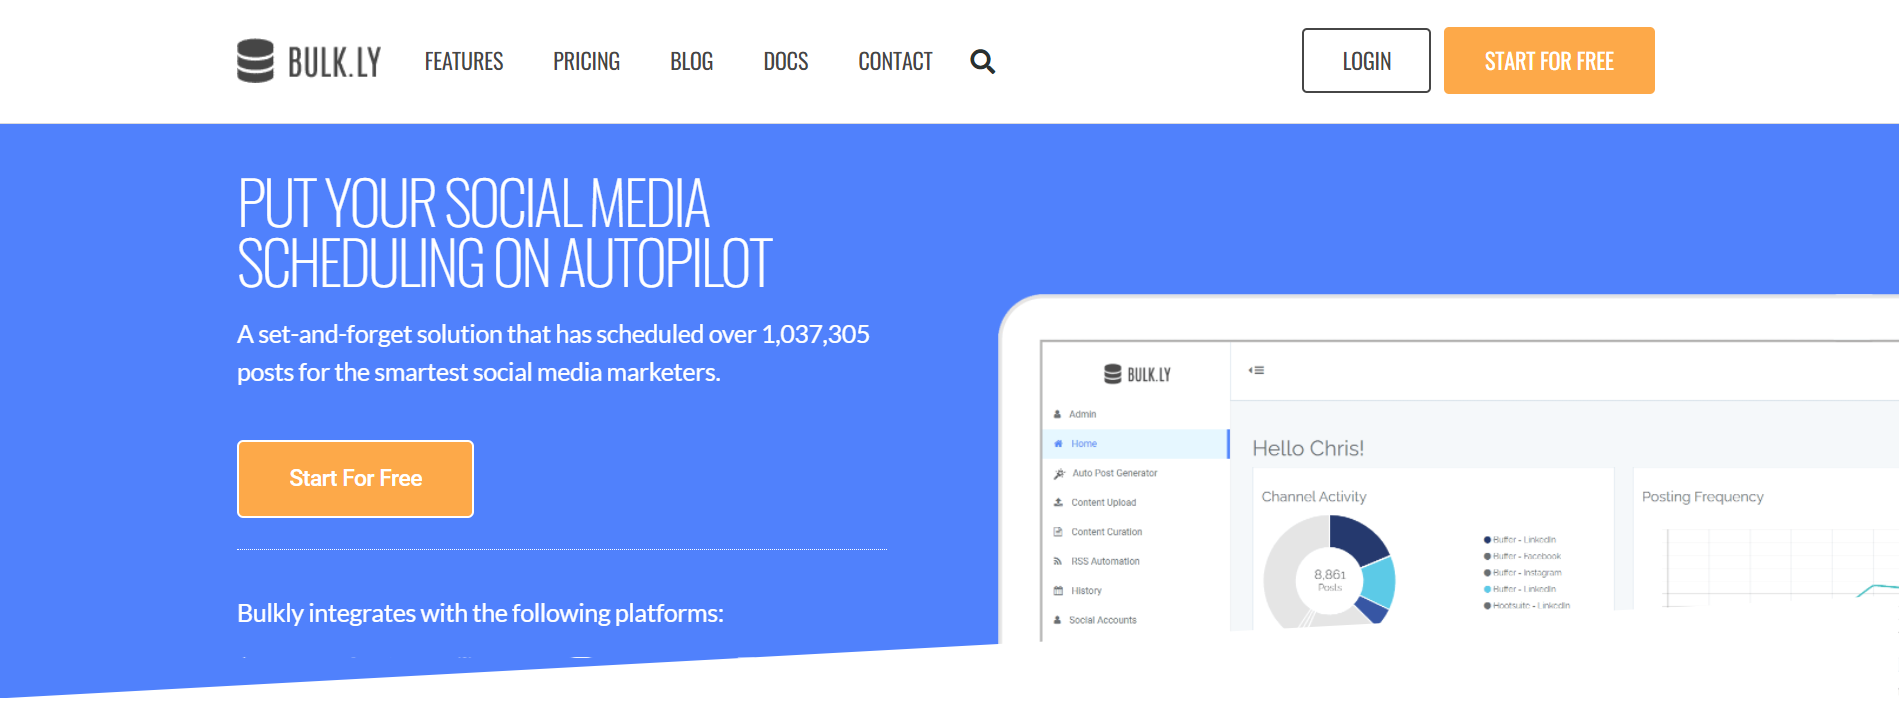 Bulk.ly social media content scheduling tool homepage